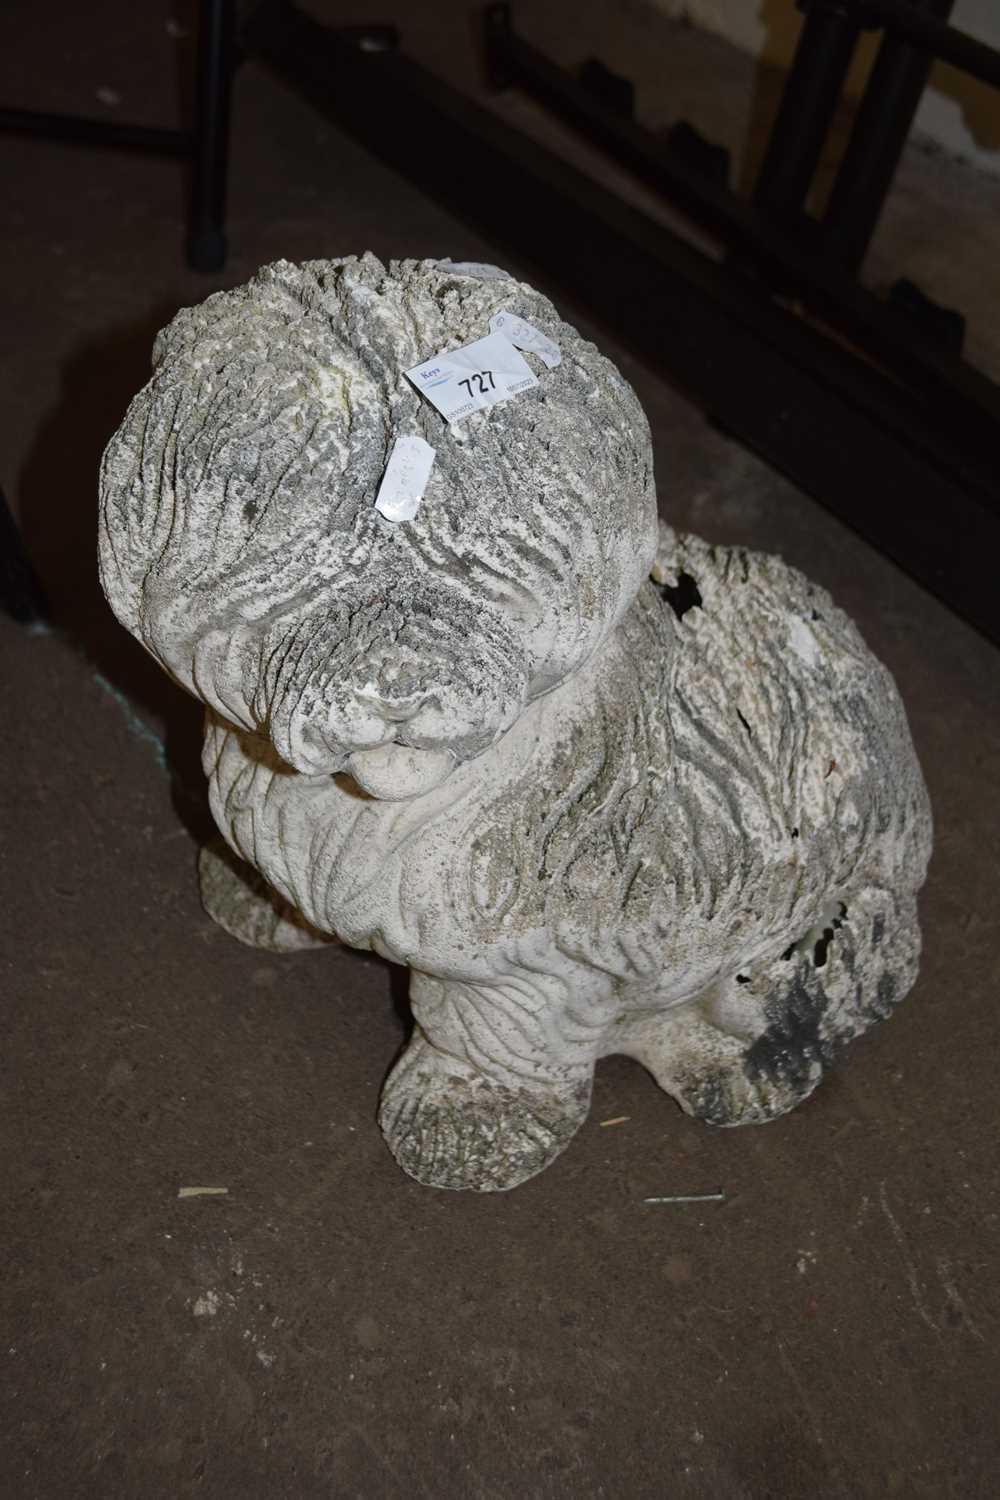 Reconstituted stone model of a shaggy dog